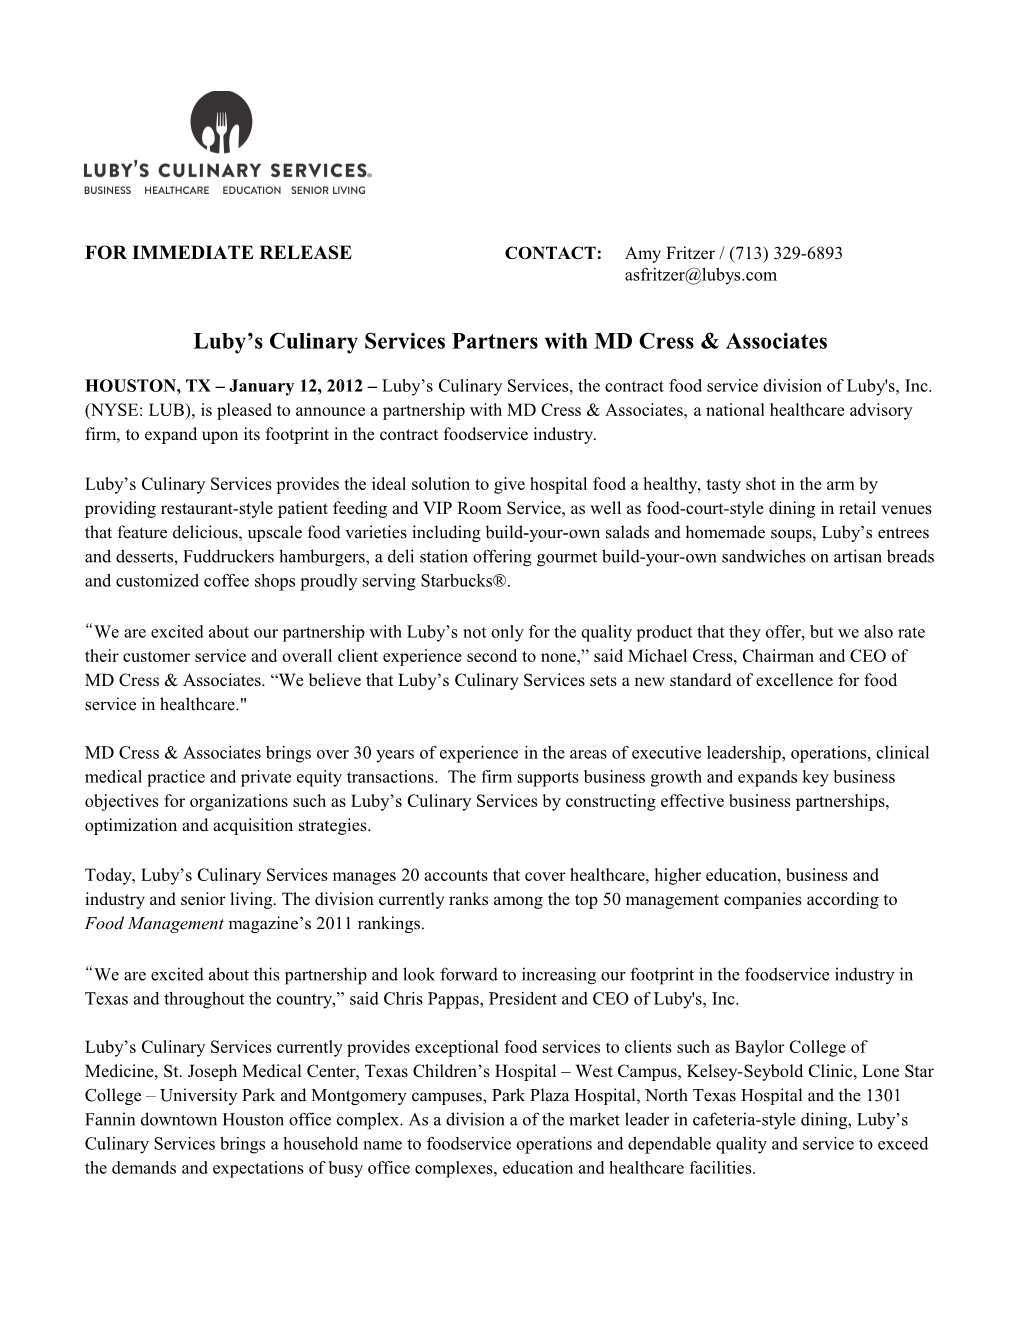 Luby S Culinary Services Partners with MD Cress & Associates